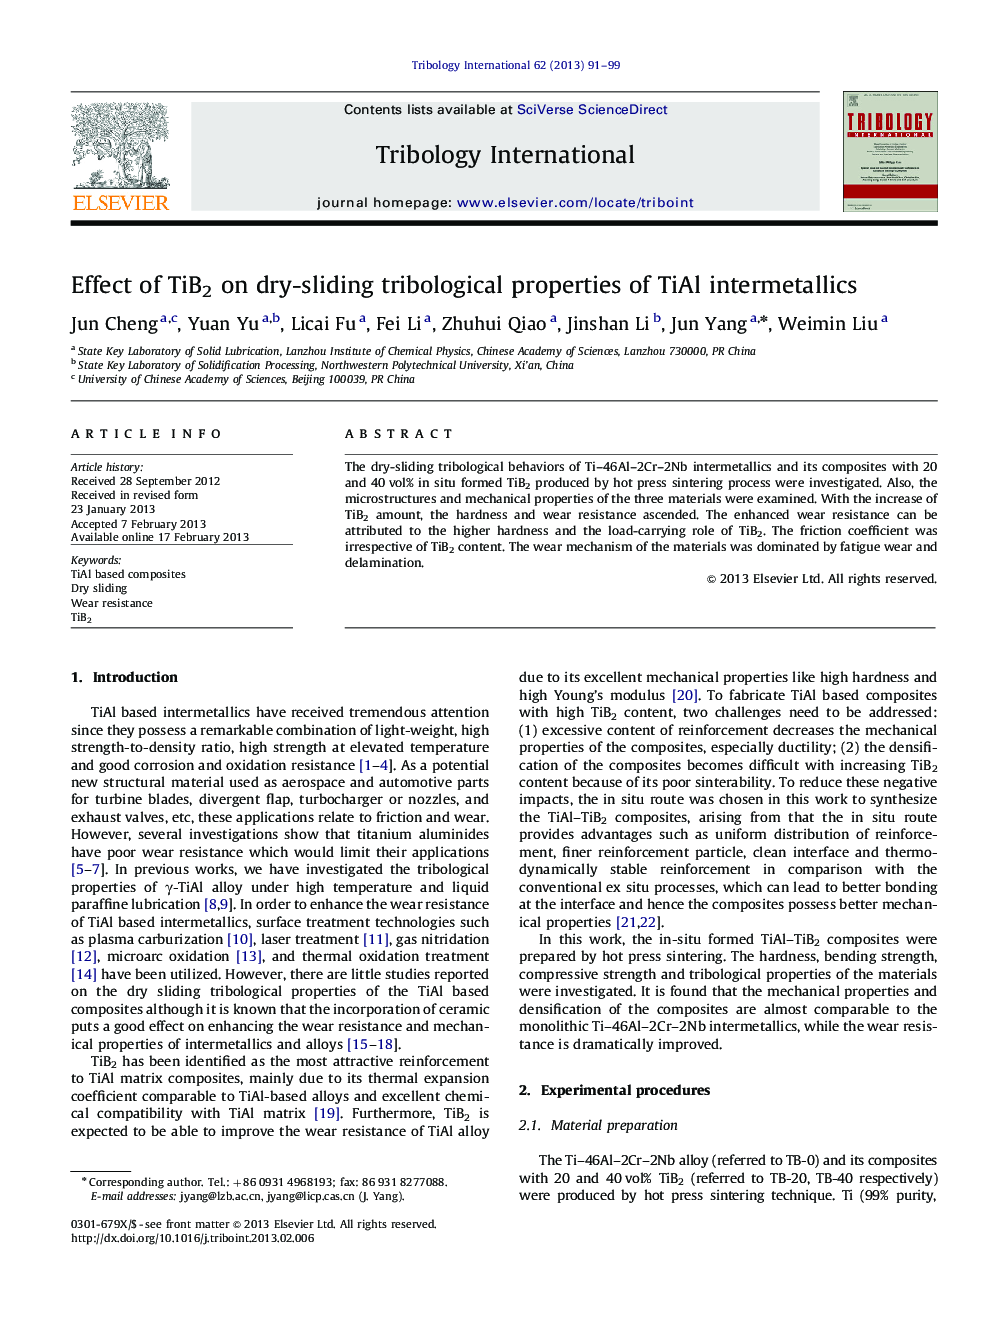 Effect of TiB2 on dry-sliding tribological properties of TiAl intermetallics